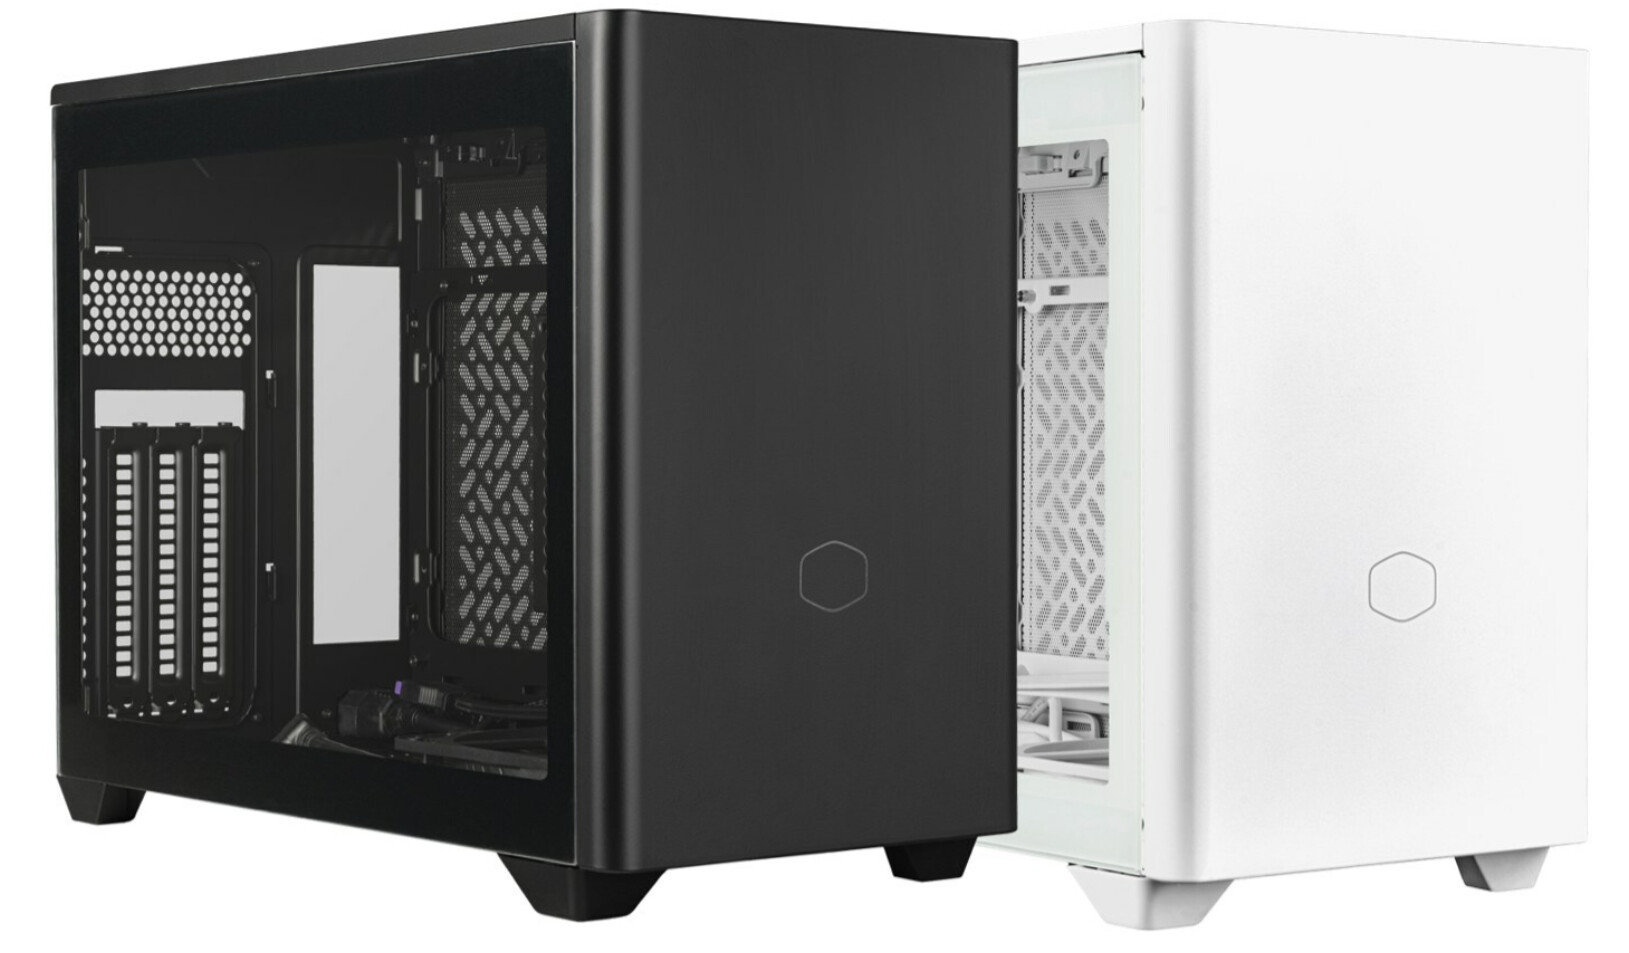 The NR200P V2 - Cooler Master's latest release, is a modernized version of a beloved classic case.